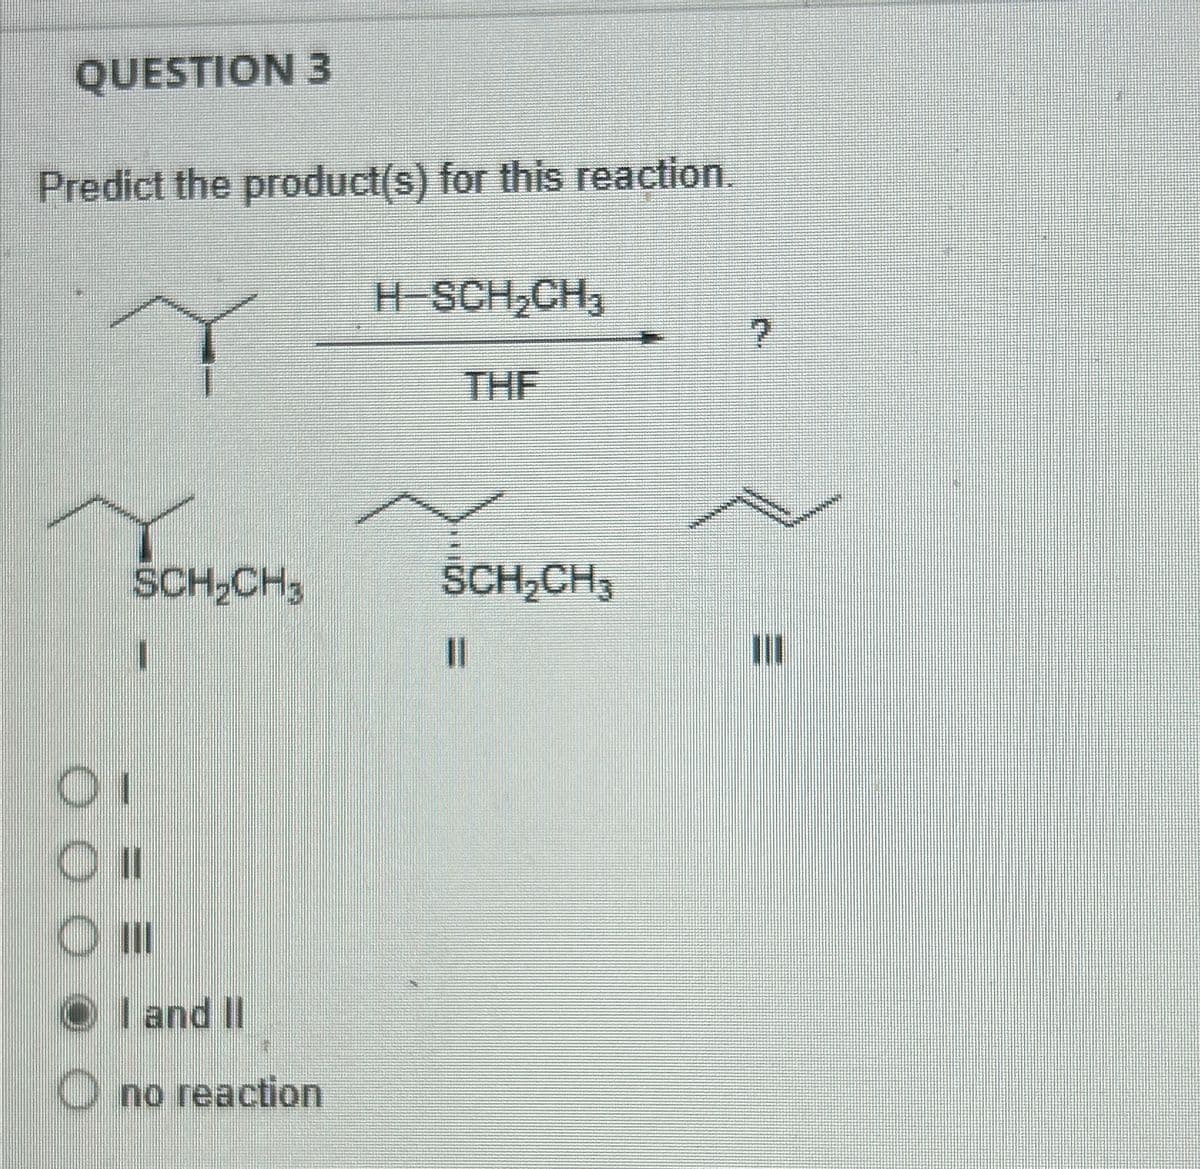 QUESTION 3
Predict the product(s) for this reaction.
Y
H-SCH₂CH3
THE
SCH₂CH₂ SCH₂
SCH₂CH3
Οι
O II
ОШ
OI and II
O no reaction